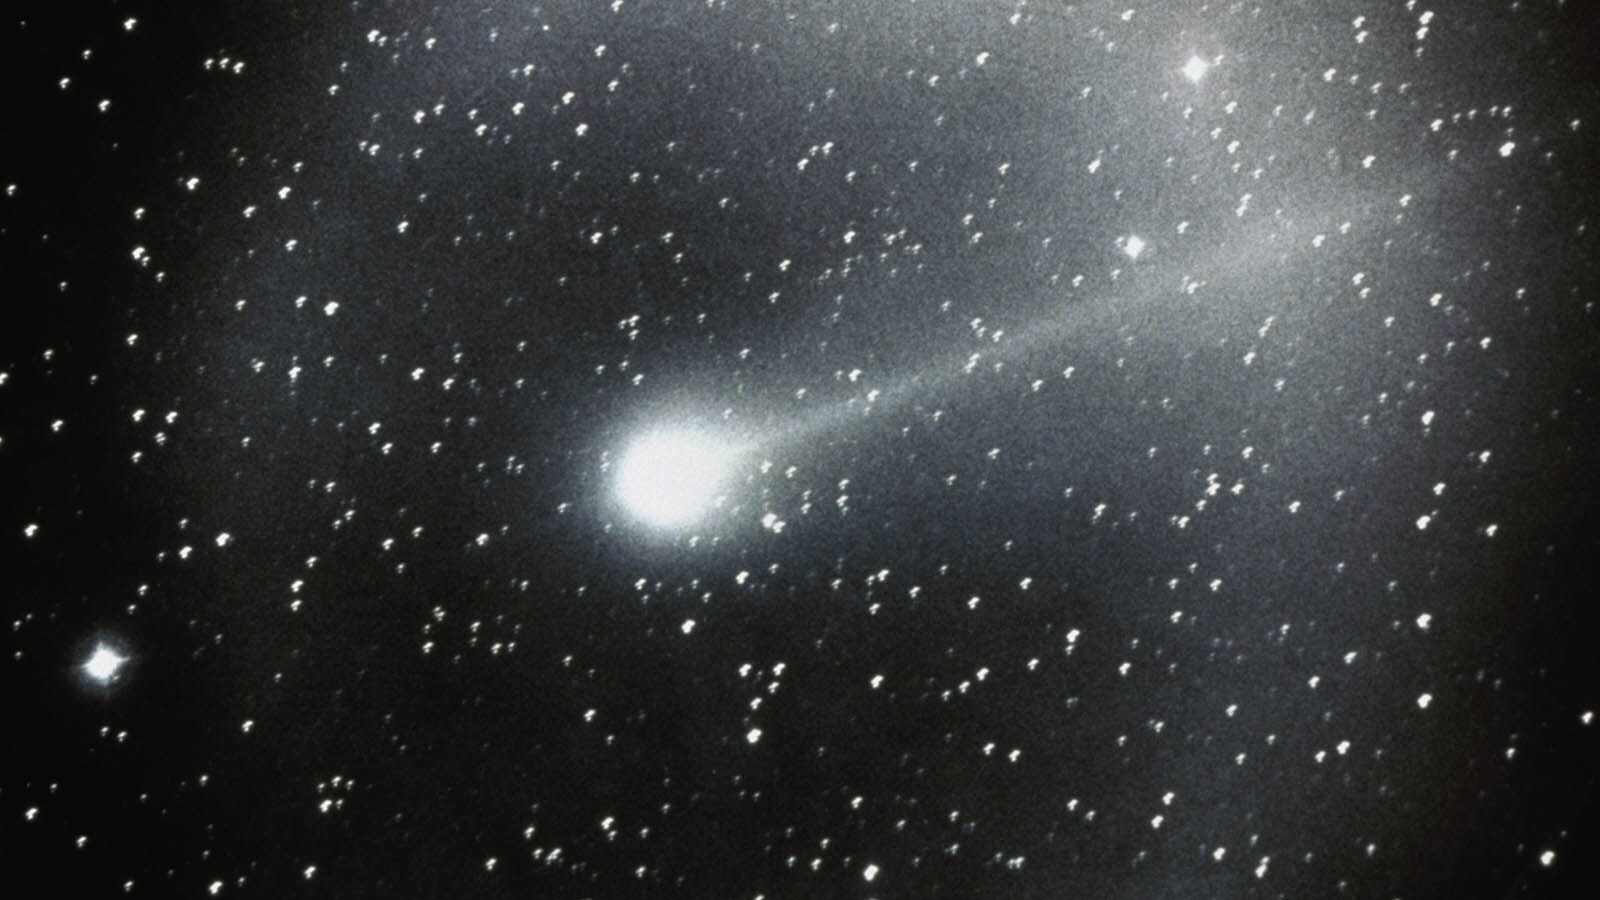 Halley's Comet passes through space as seen from the Ford Observatory in 1986.